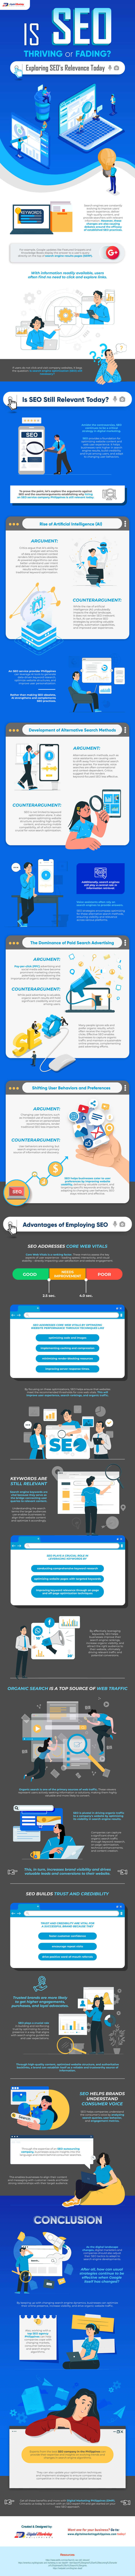 Is SEO Thriving or Fading? Exploring SEO's Relevance Today (Infographic)